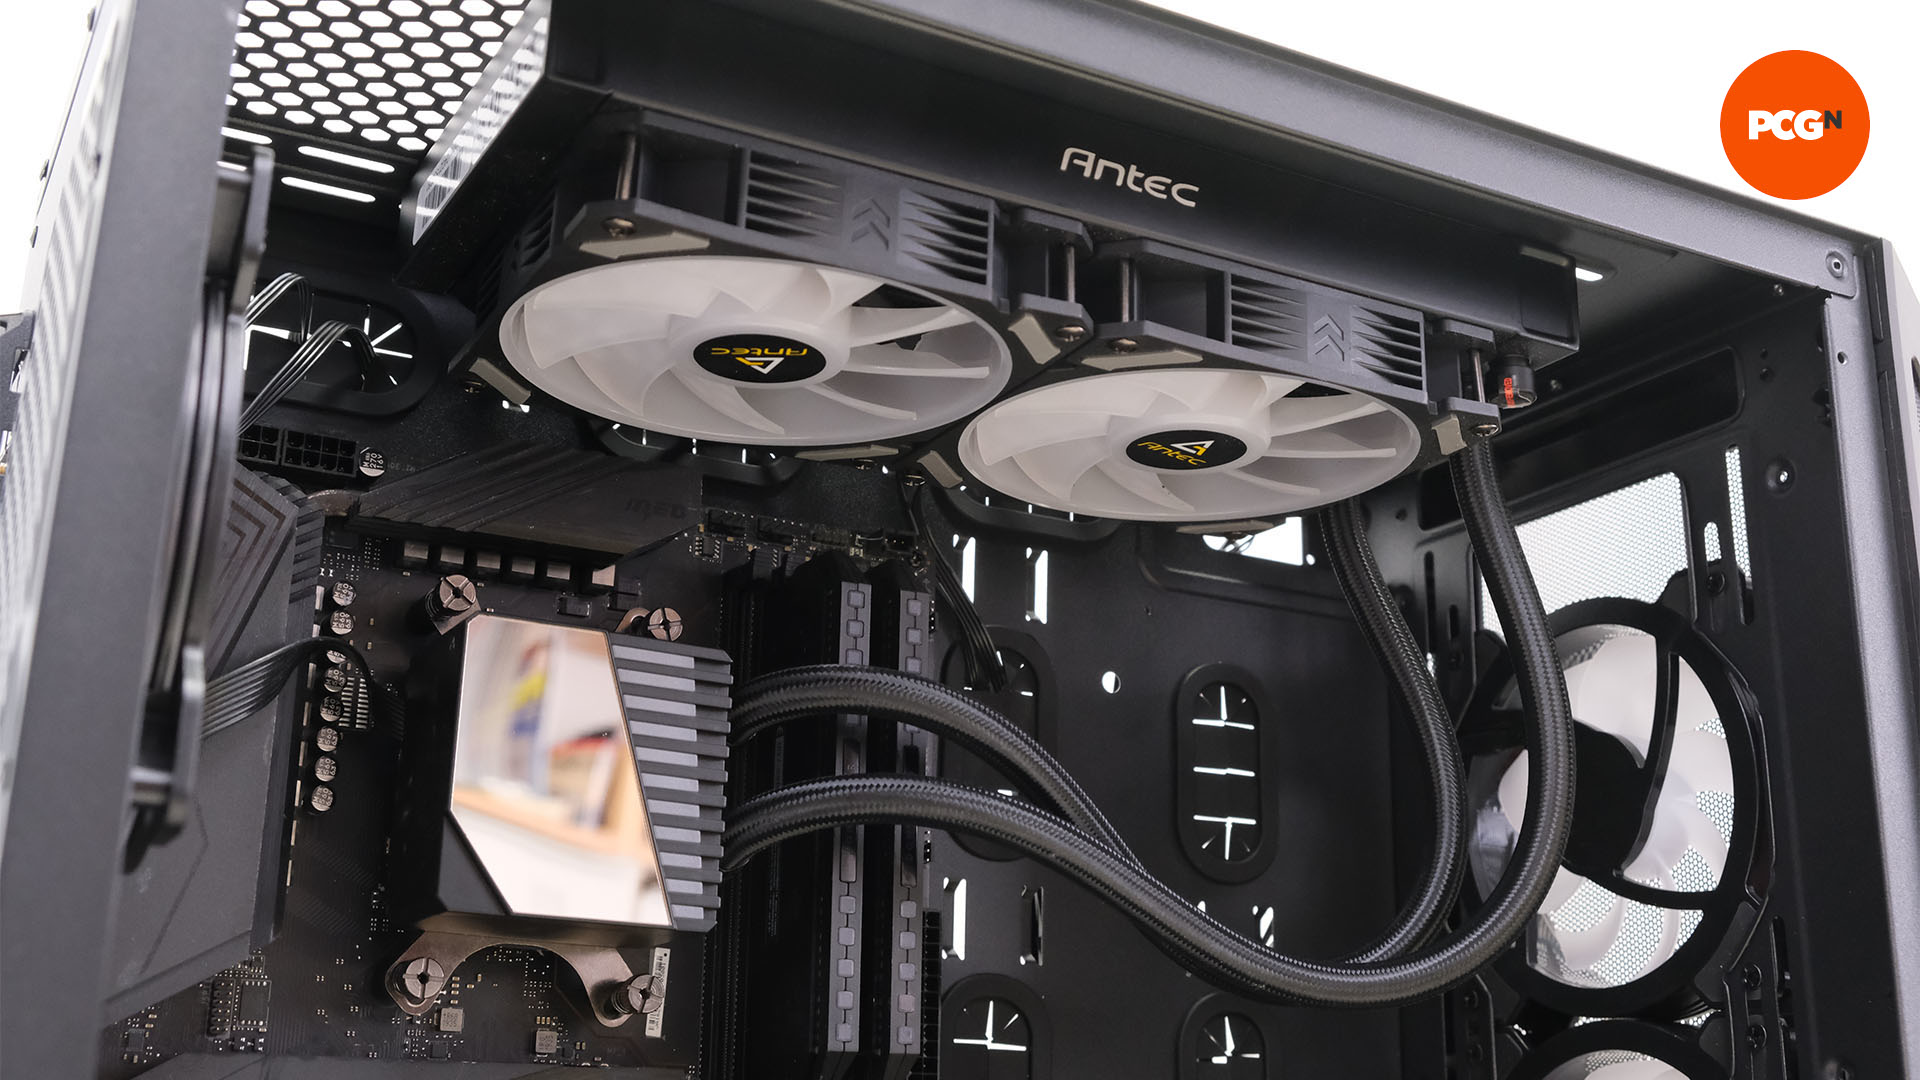 The AIO radiator is mounted to the top of the PC case